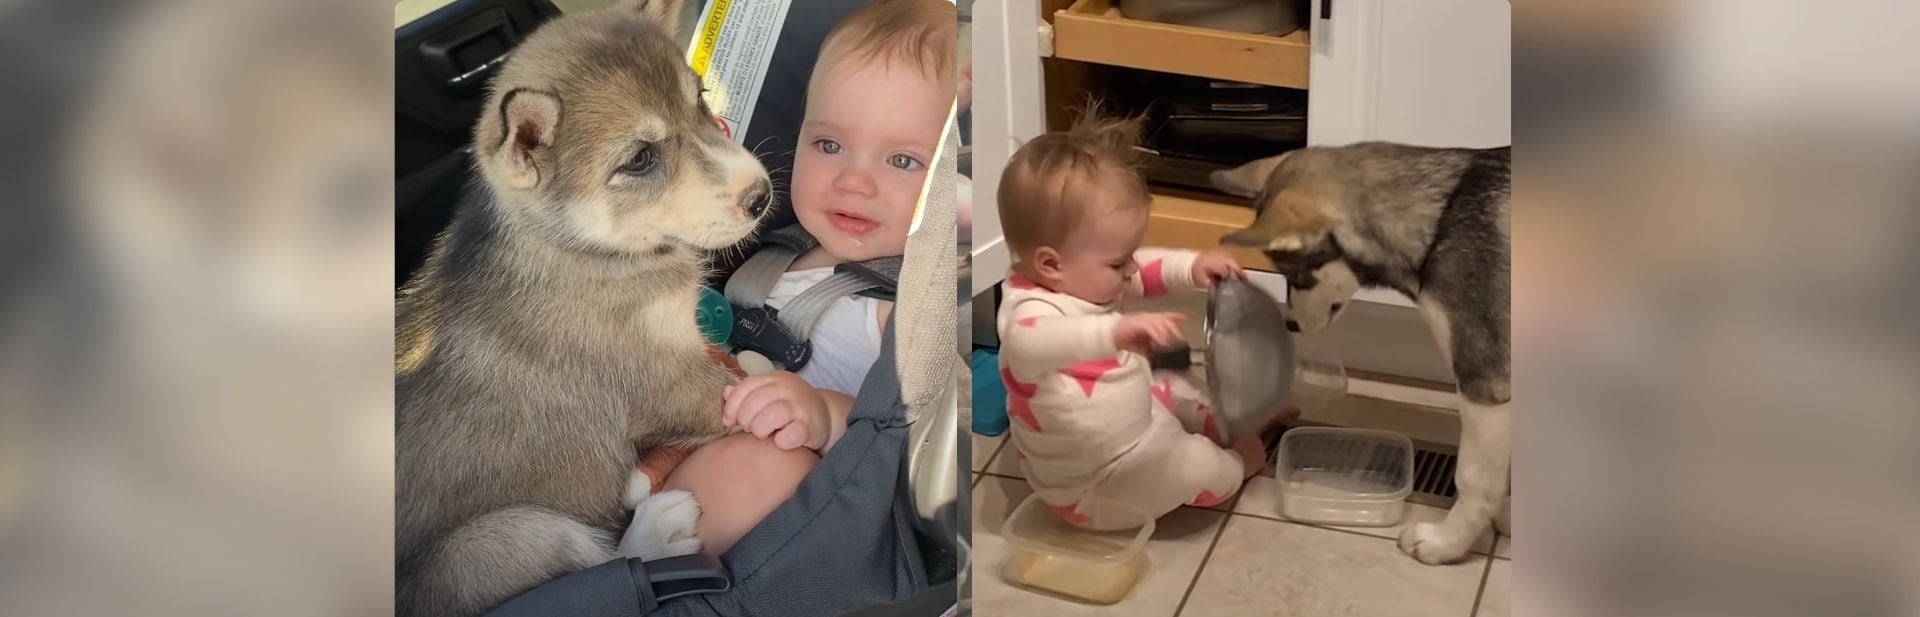 Lonely Puppy Bonds With A Special Little Friend And They Become Inseparable